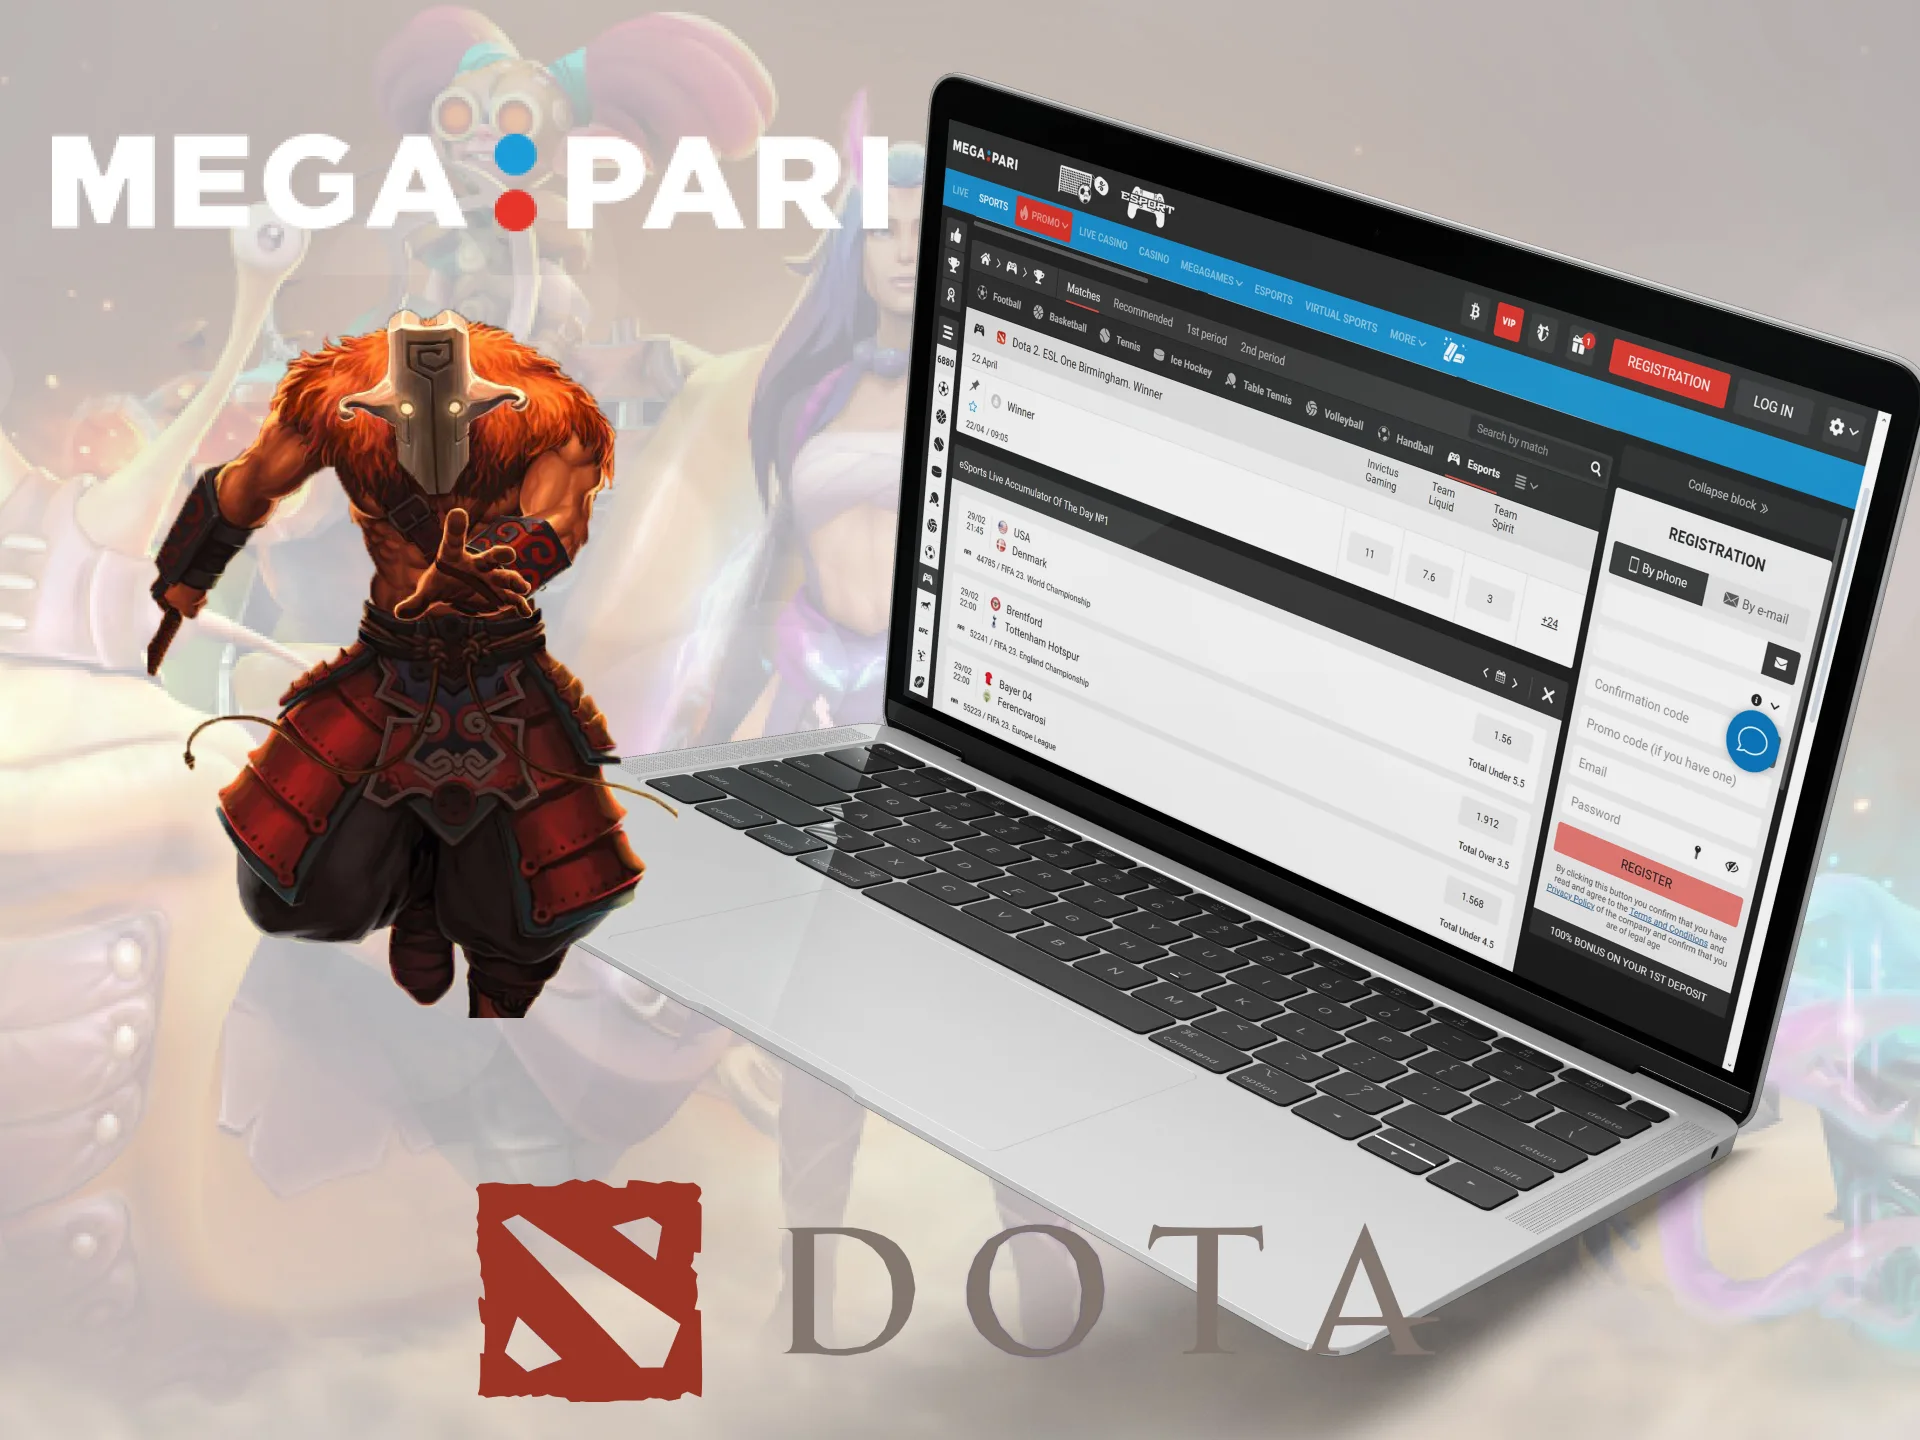 The Megapary brand has been recognized by Dota 2 bettors of all levels.